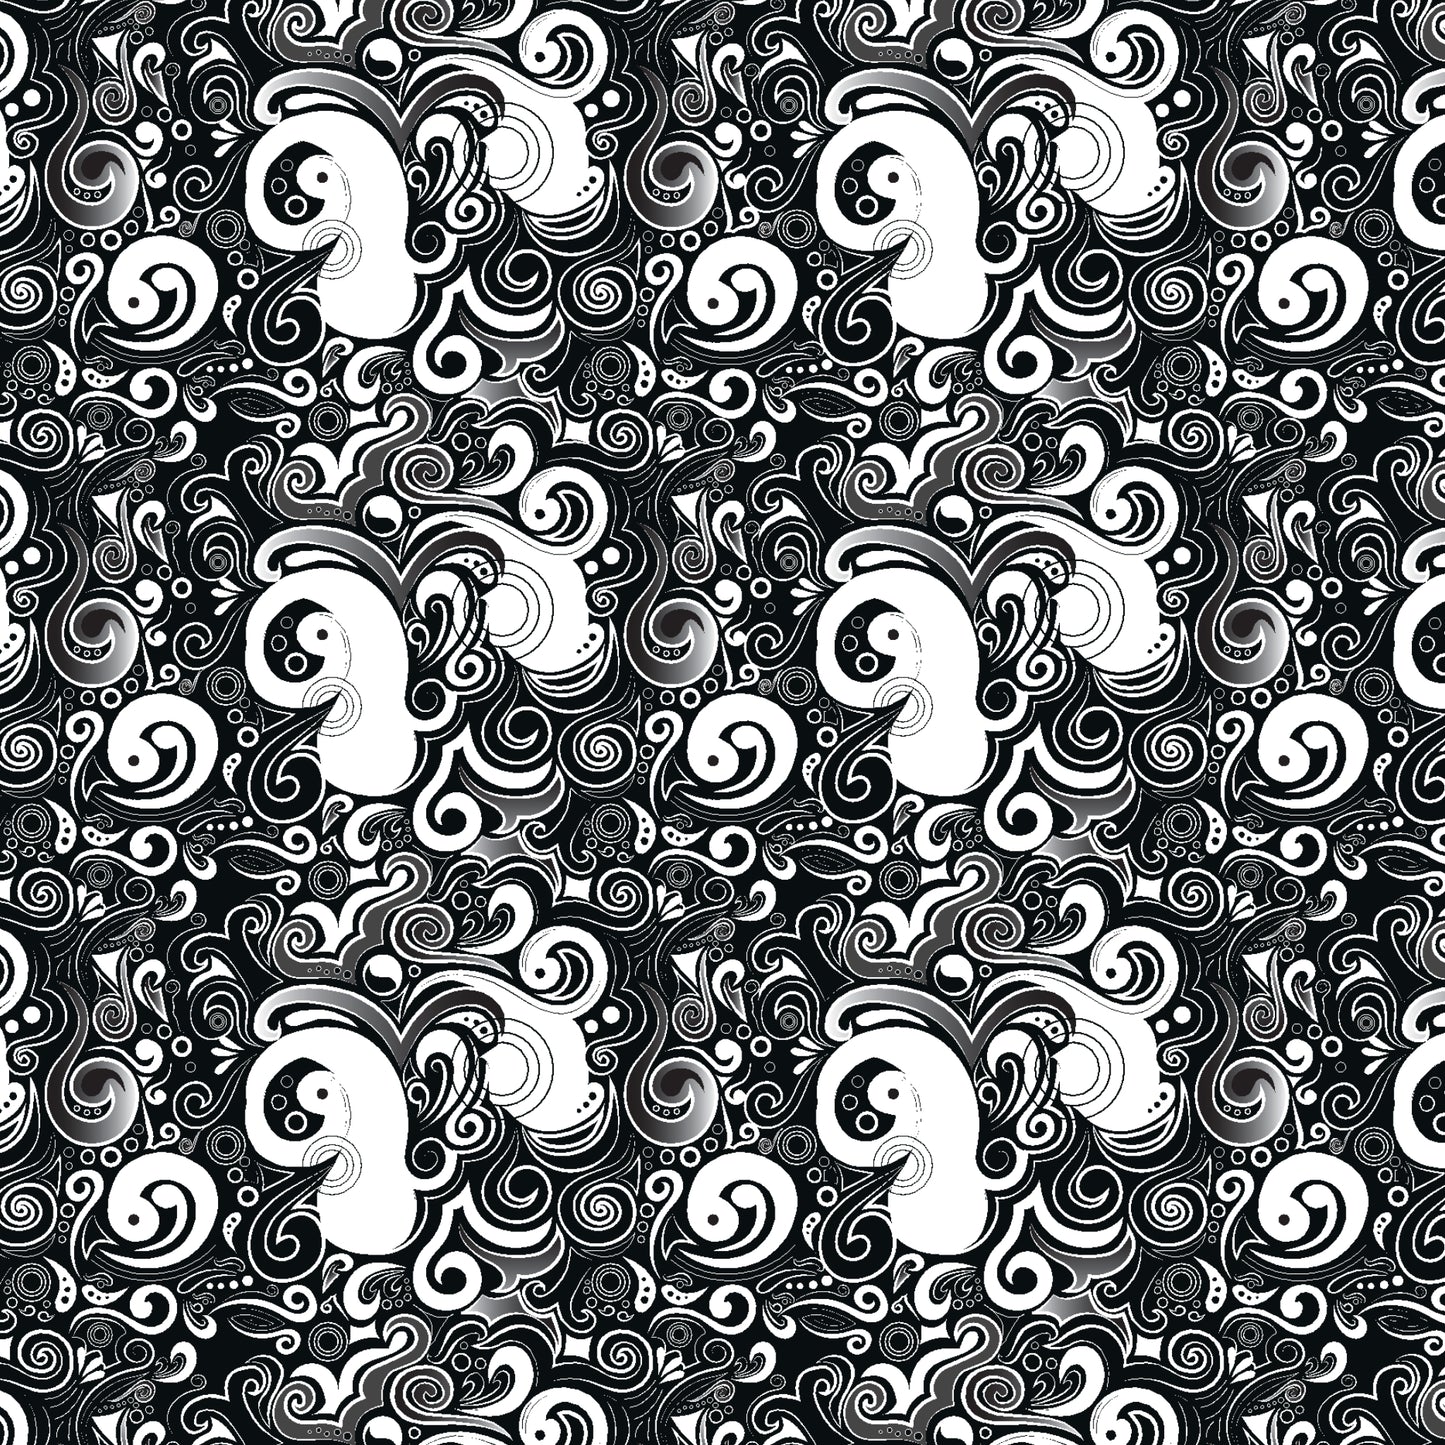 Abstract-Black-White-Psychedelic-Kitsch-RainbowsAndFairies.com.au-ABSTR_ORG-01